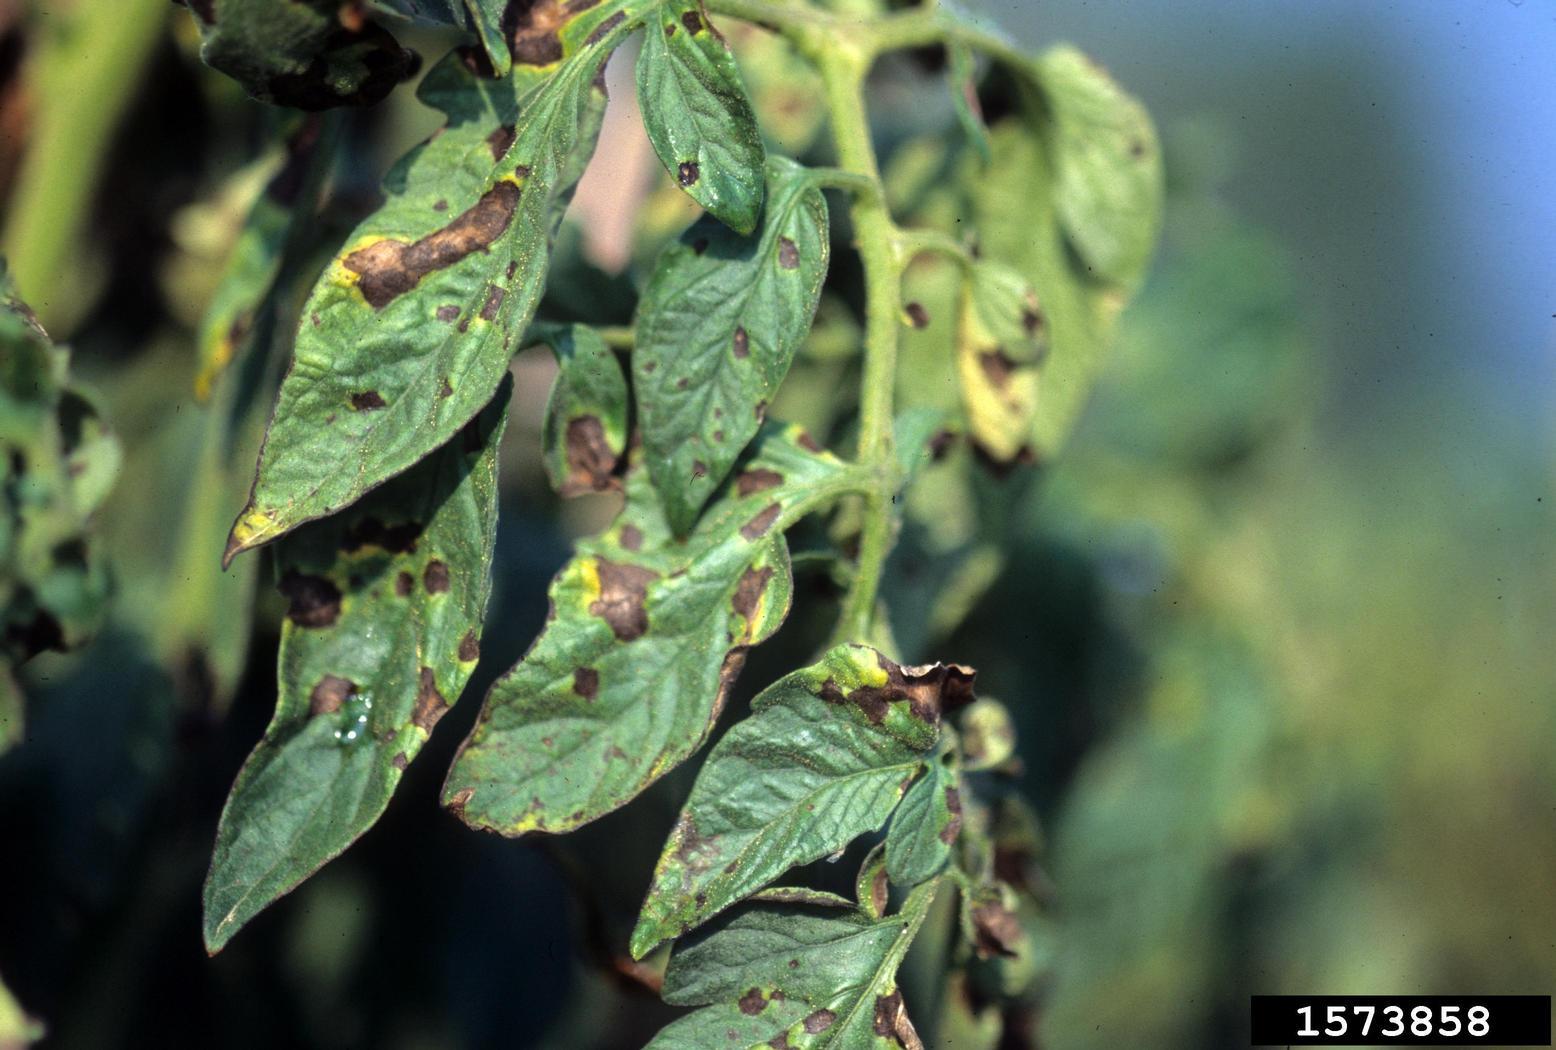 early blight disease lesions on tomato leaves